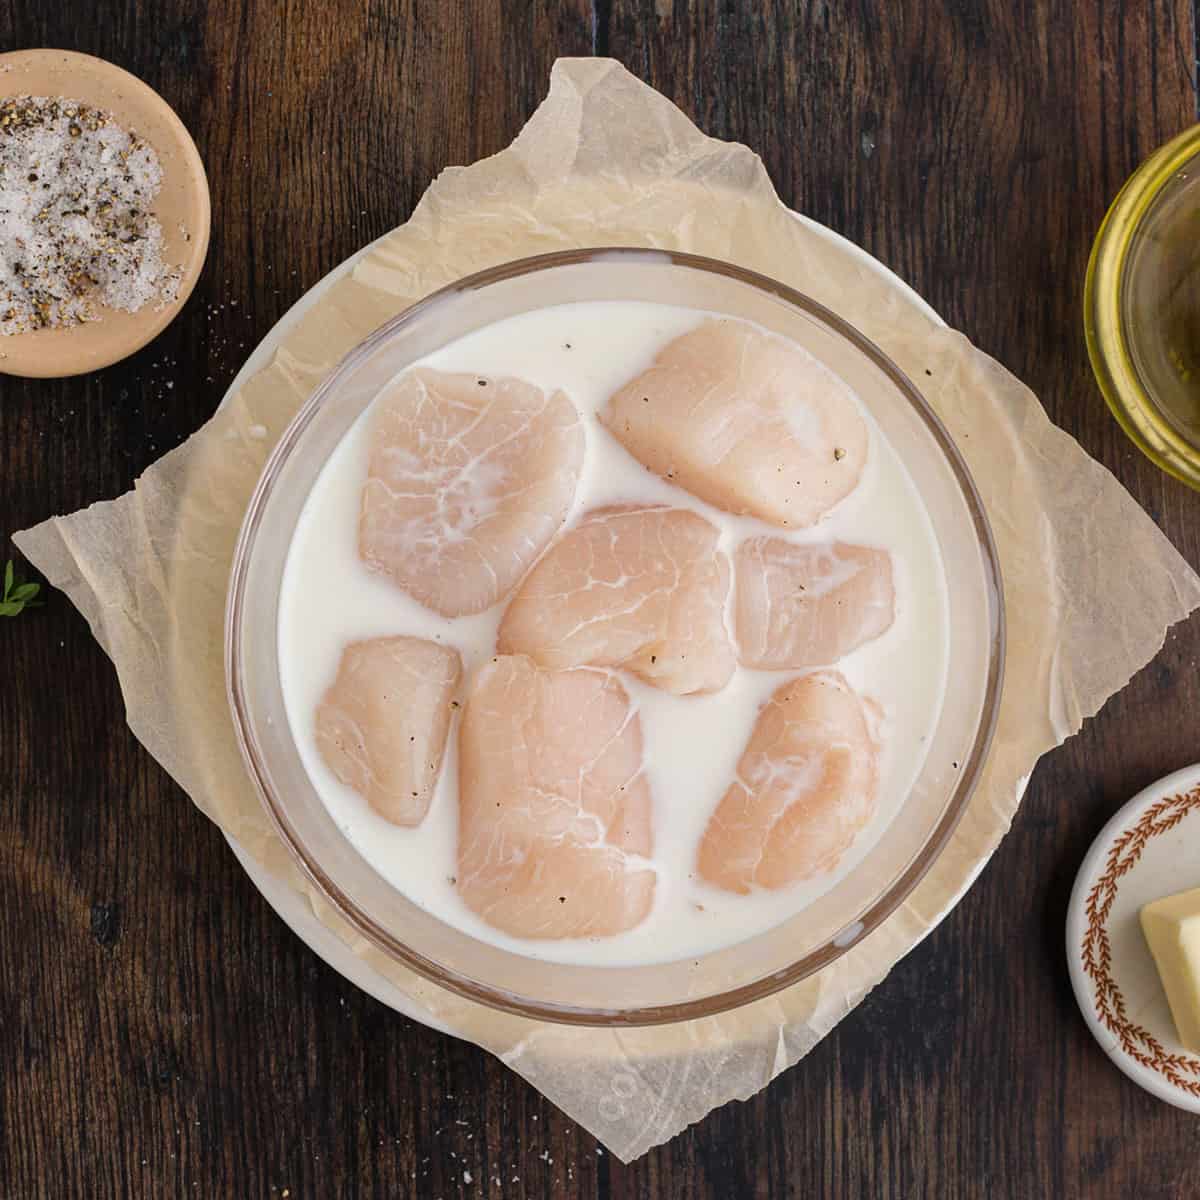 A bowl of scallops being soaked in milk.